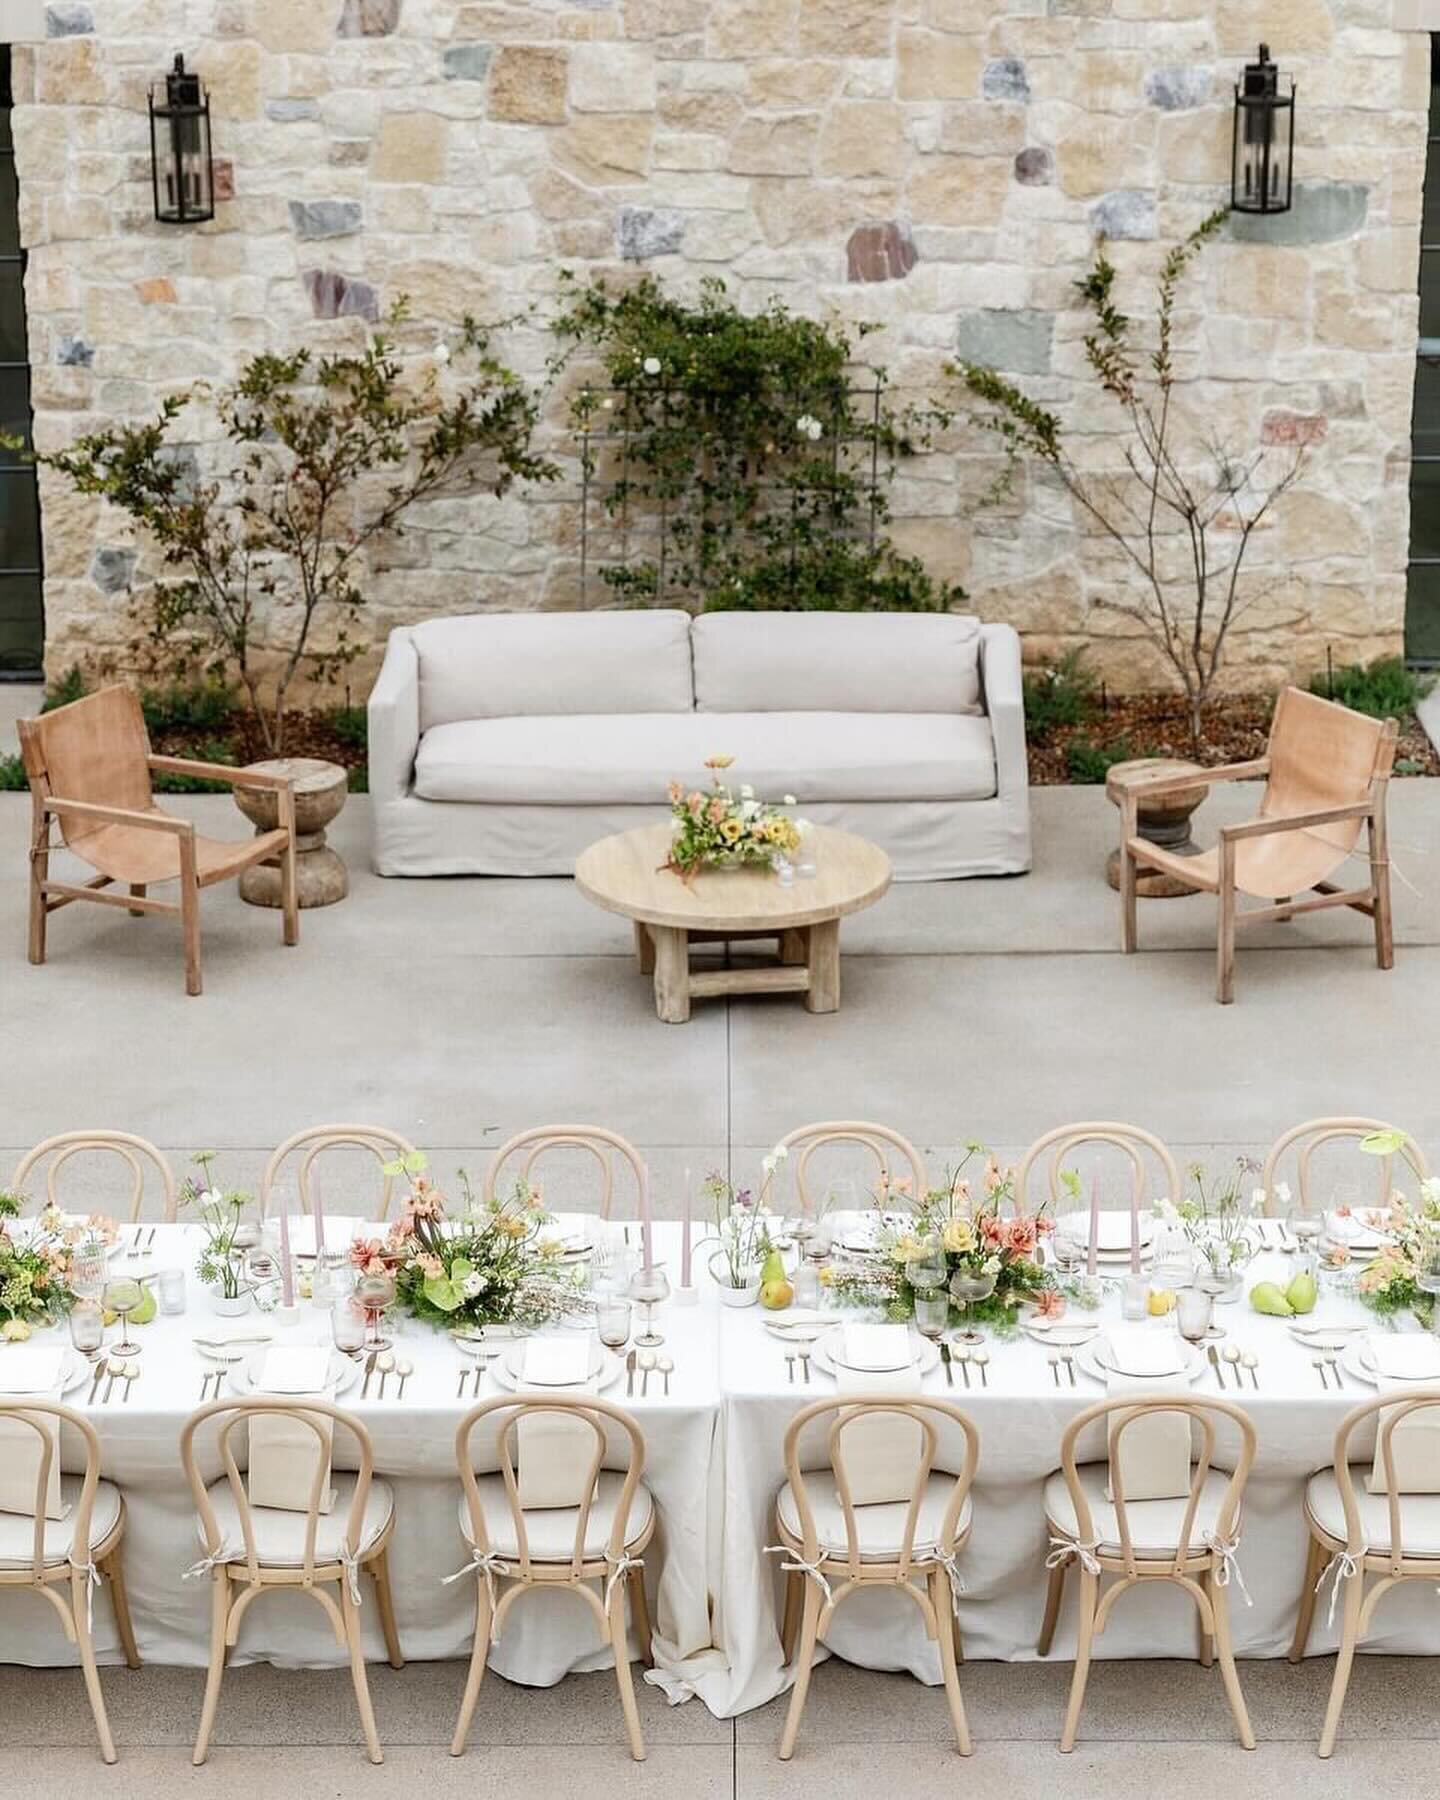 When sneak peeks come in and you can&rsquo;t help but share🤍 
.
.
.
Photography: @marisaruthphotography 
Host, Planner, &amp; Design: @wildeandsageco 
Floral Design: @solstice_bloom 
Venue: @monserateweddings 
Stationery: @itspapercliche 
Rentals: @